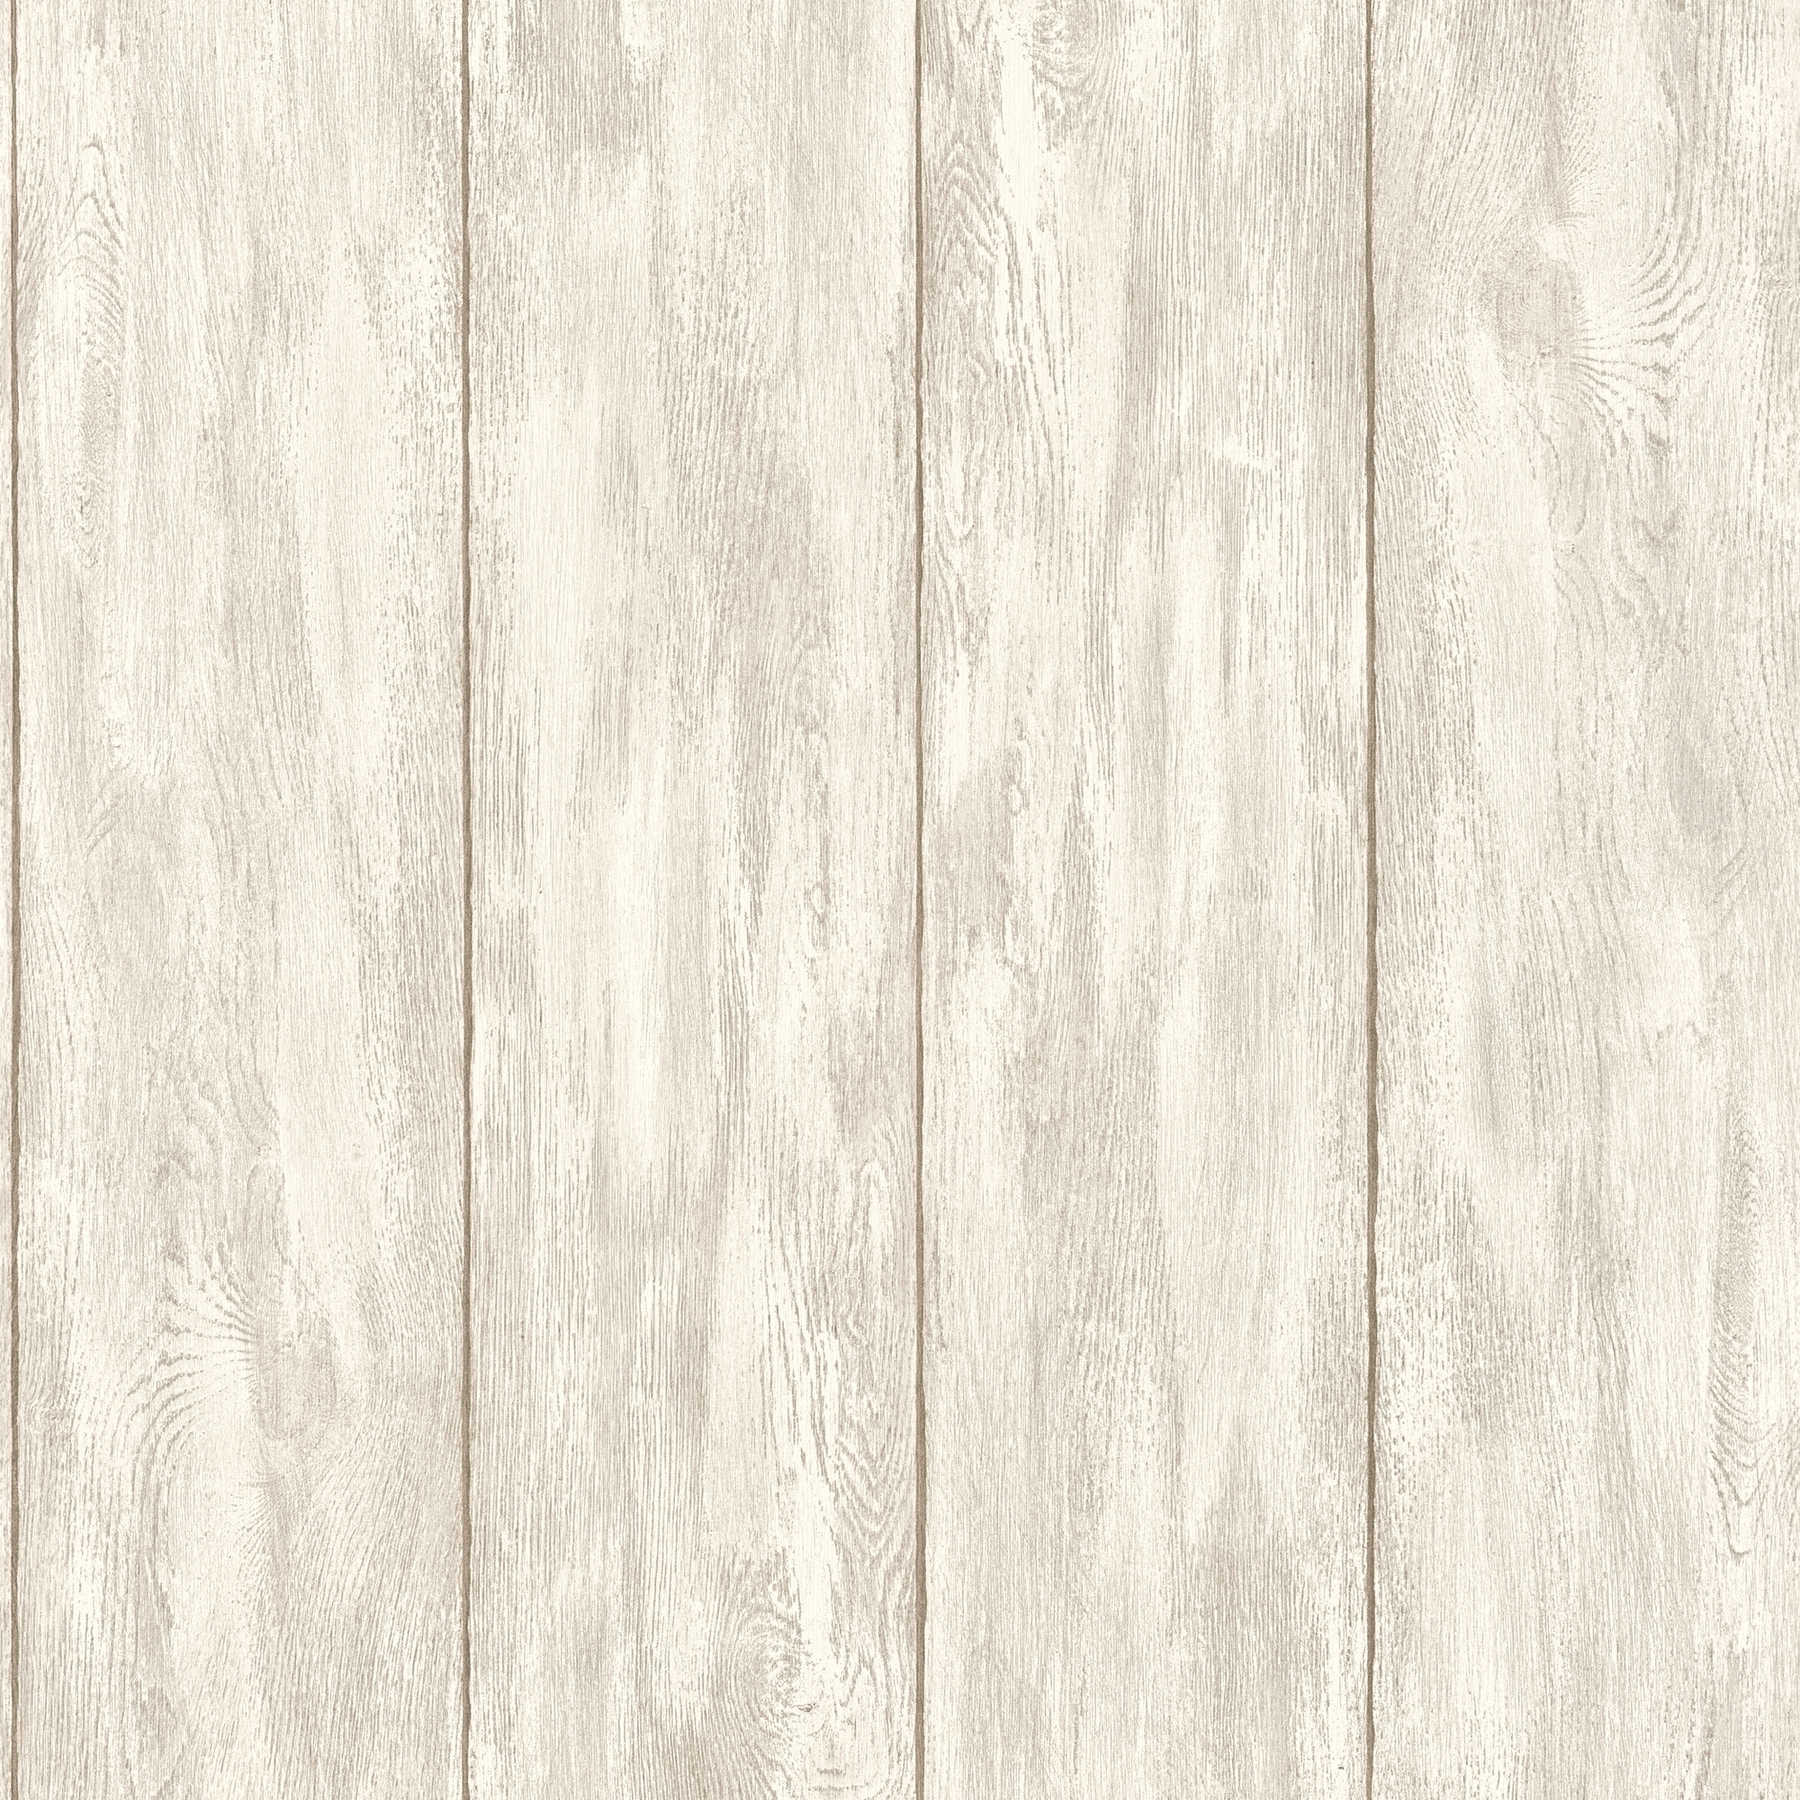         Wallpaper wood look for a cozy country house feeling - beige, cream
    